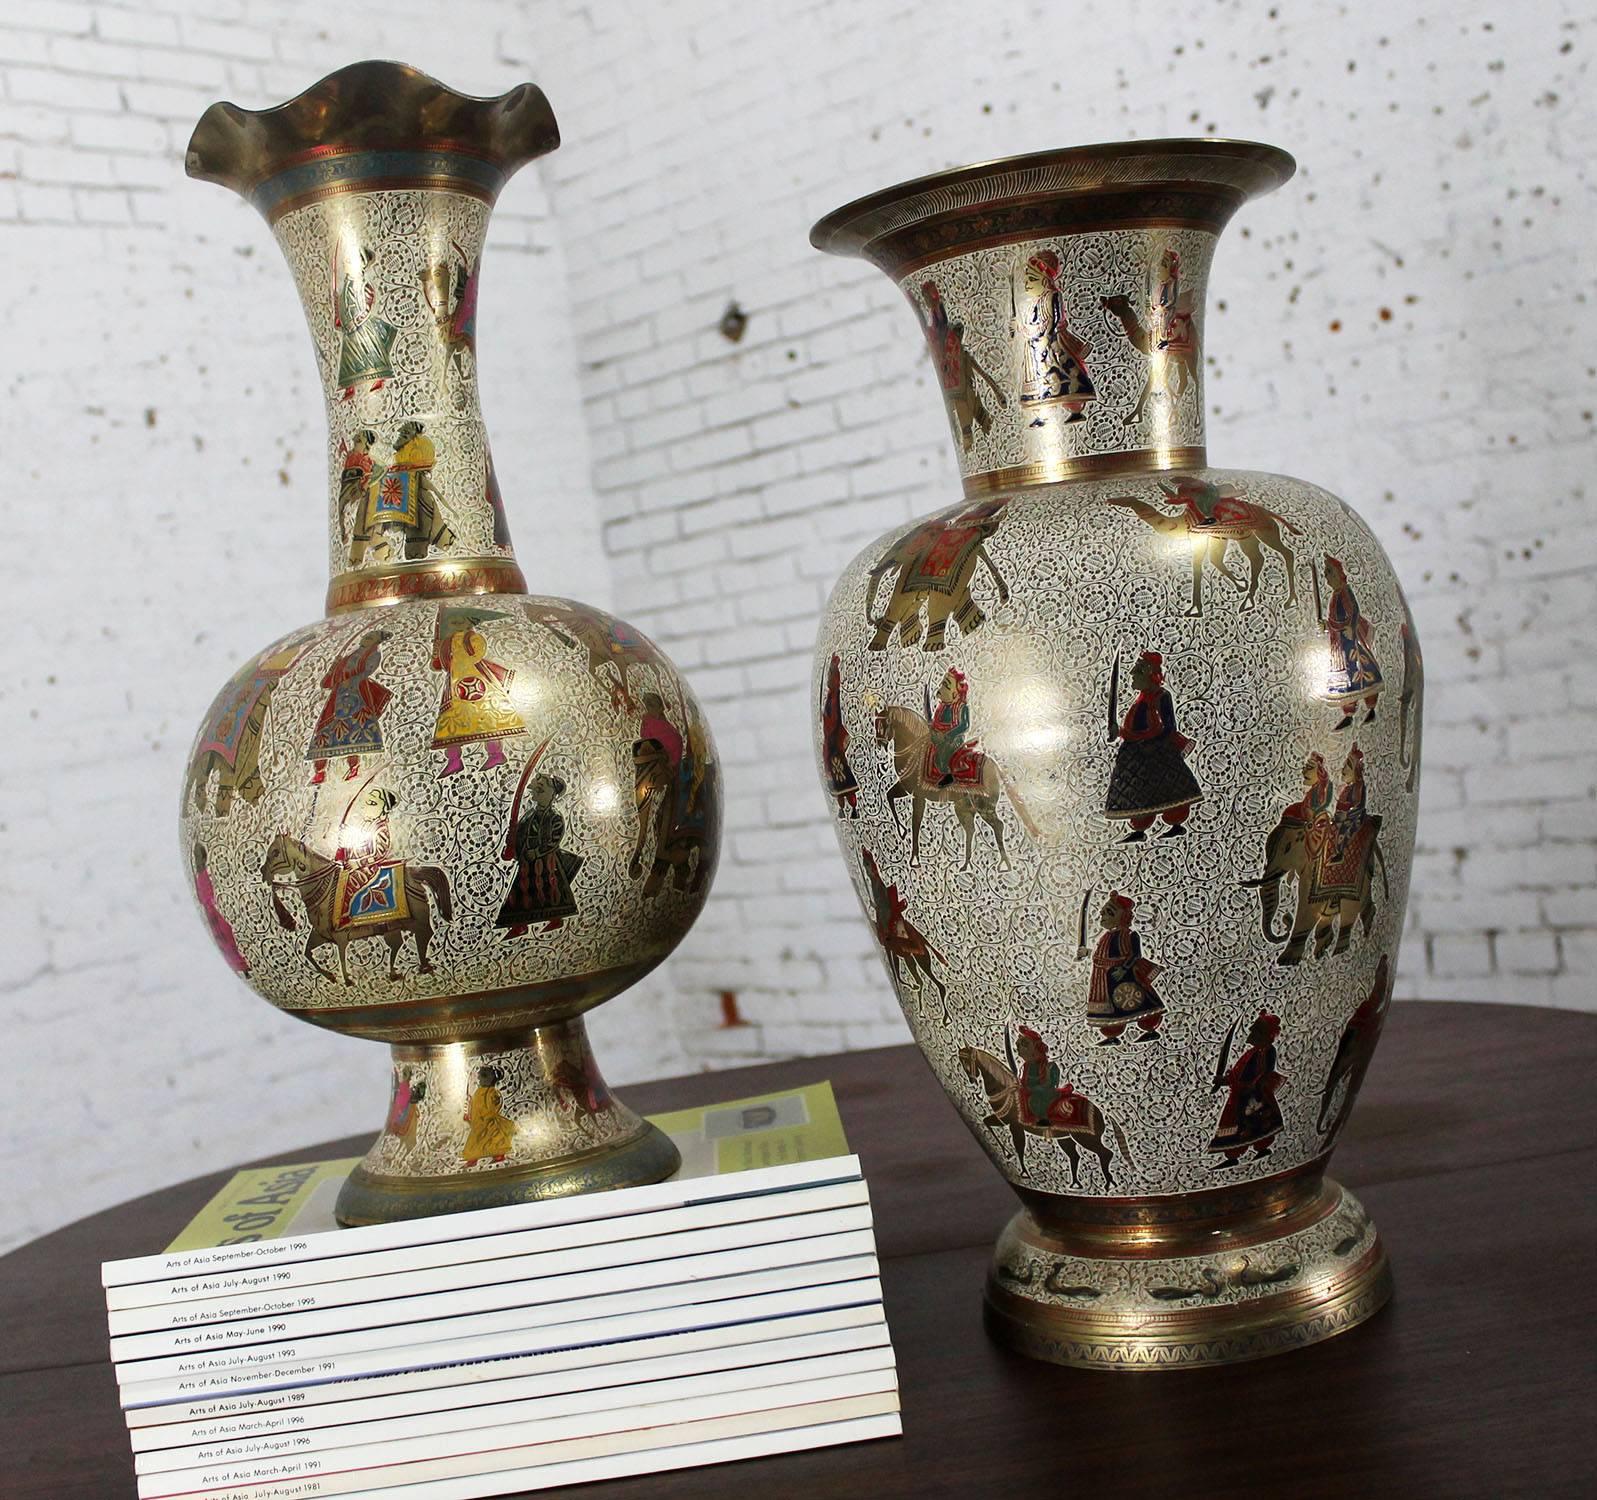 Monumental unmatched pair of vintage cast brass Kashmiri Indo Persian vases. Elegantly etched and enameled. In excellent condition, circa 20th century.

These extra-large cast brass vase is absolutely gorgeous! Although unmatched in shape, one is